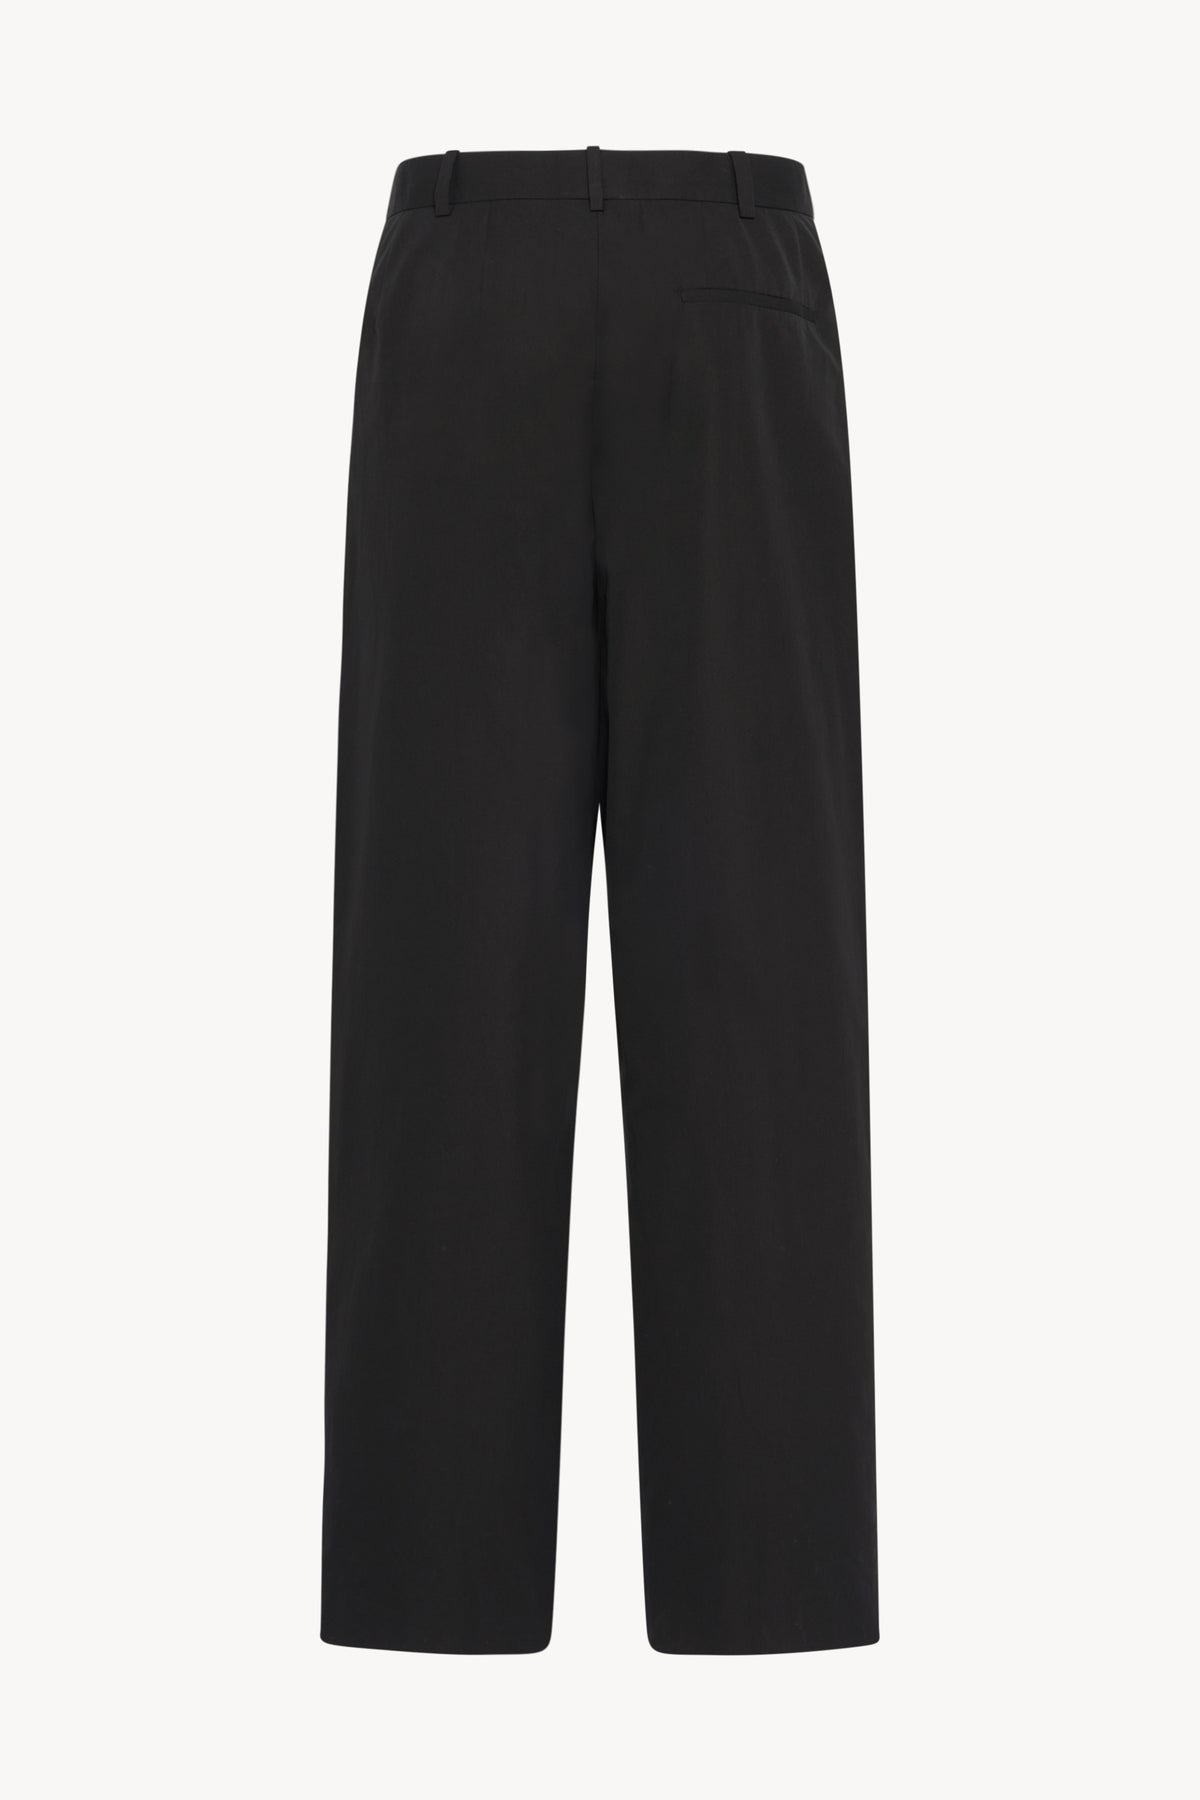 Bufus Pant Black in Cotton – The Row